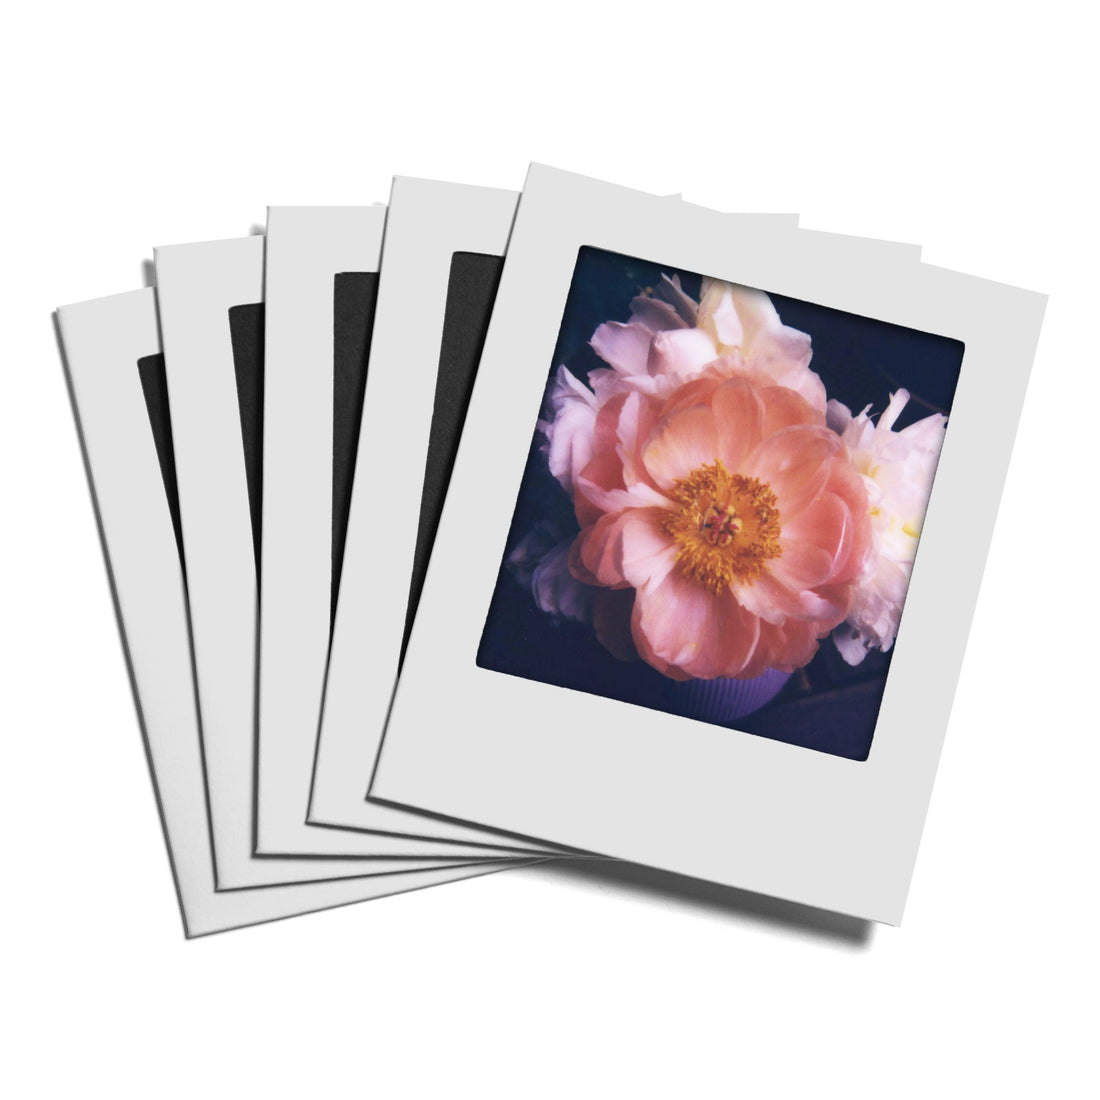 5 x Instant Photocards „White“